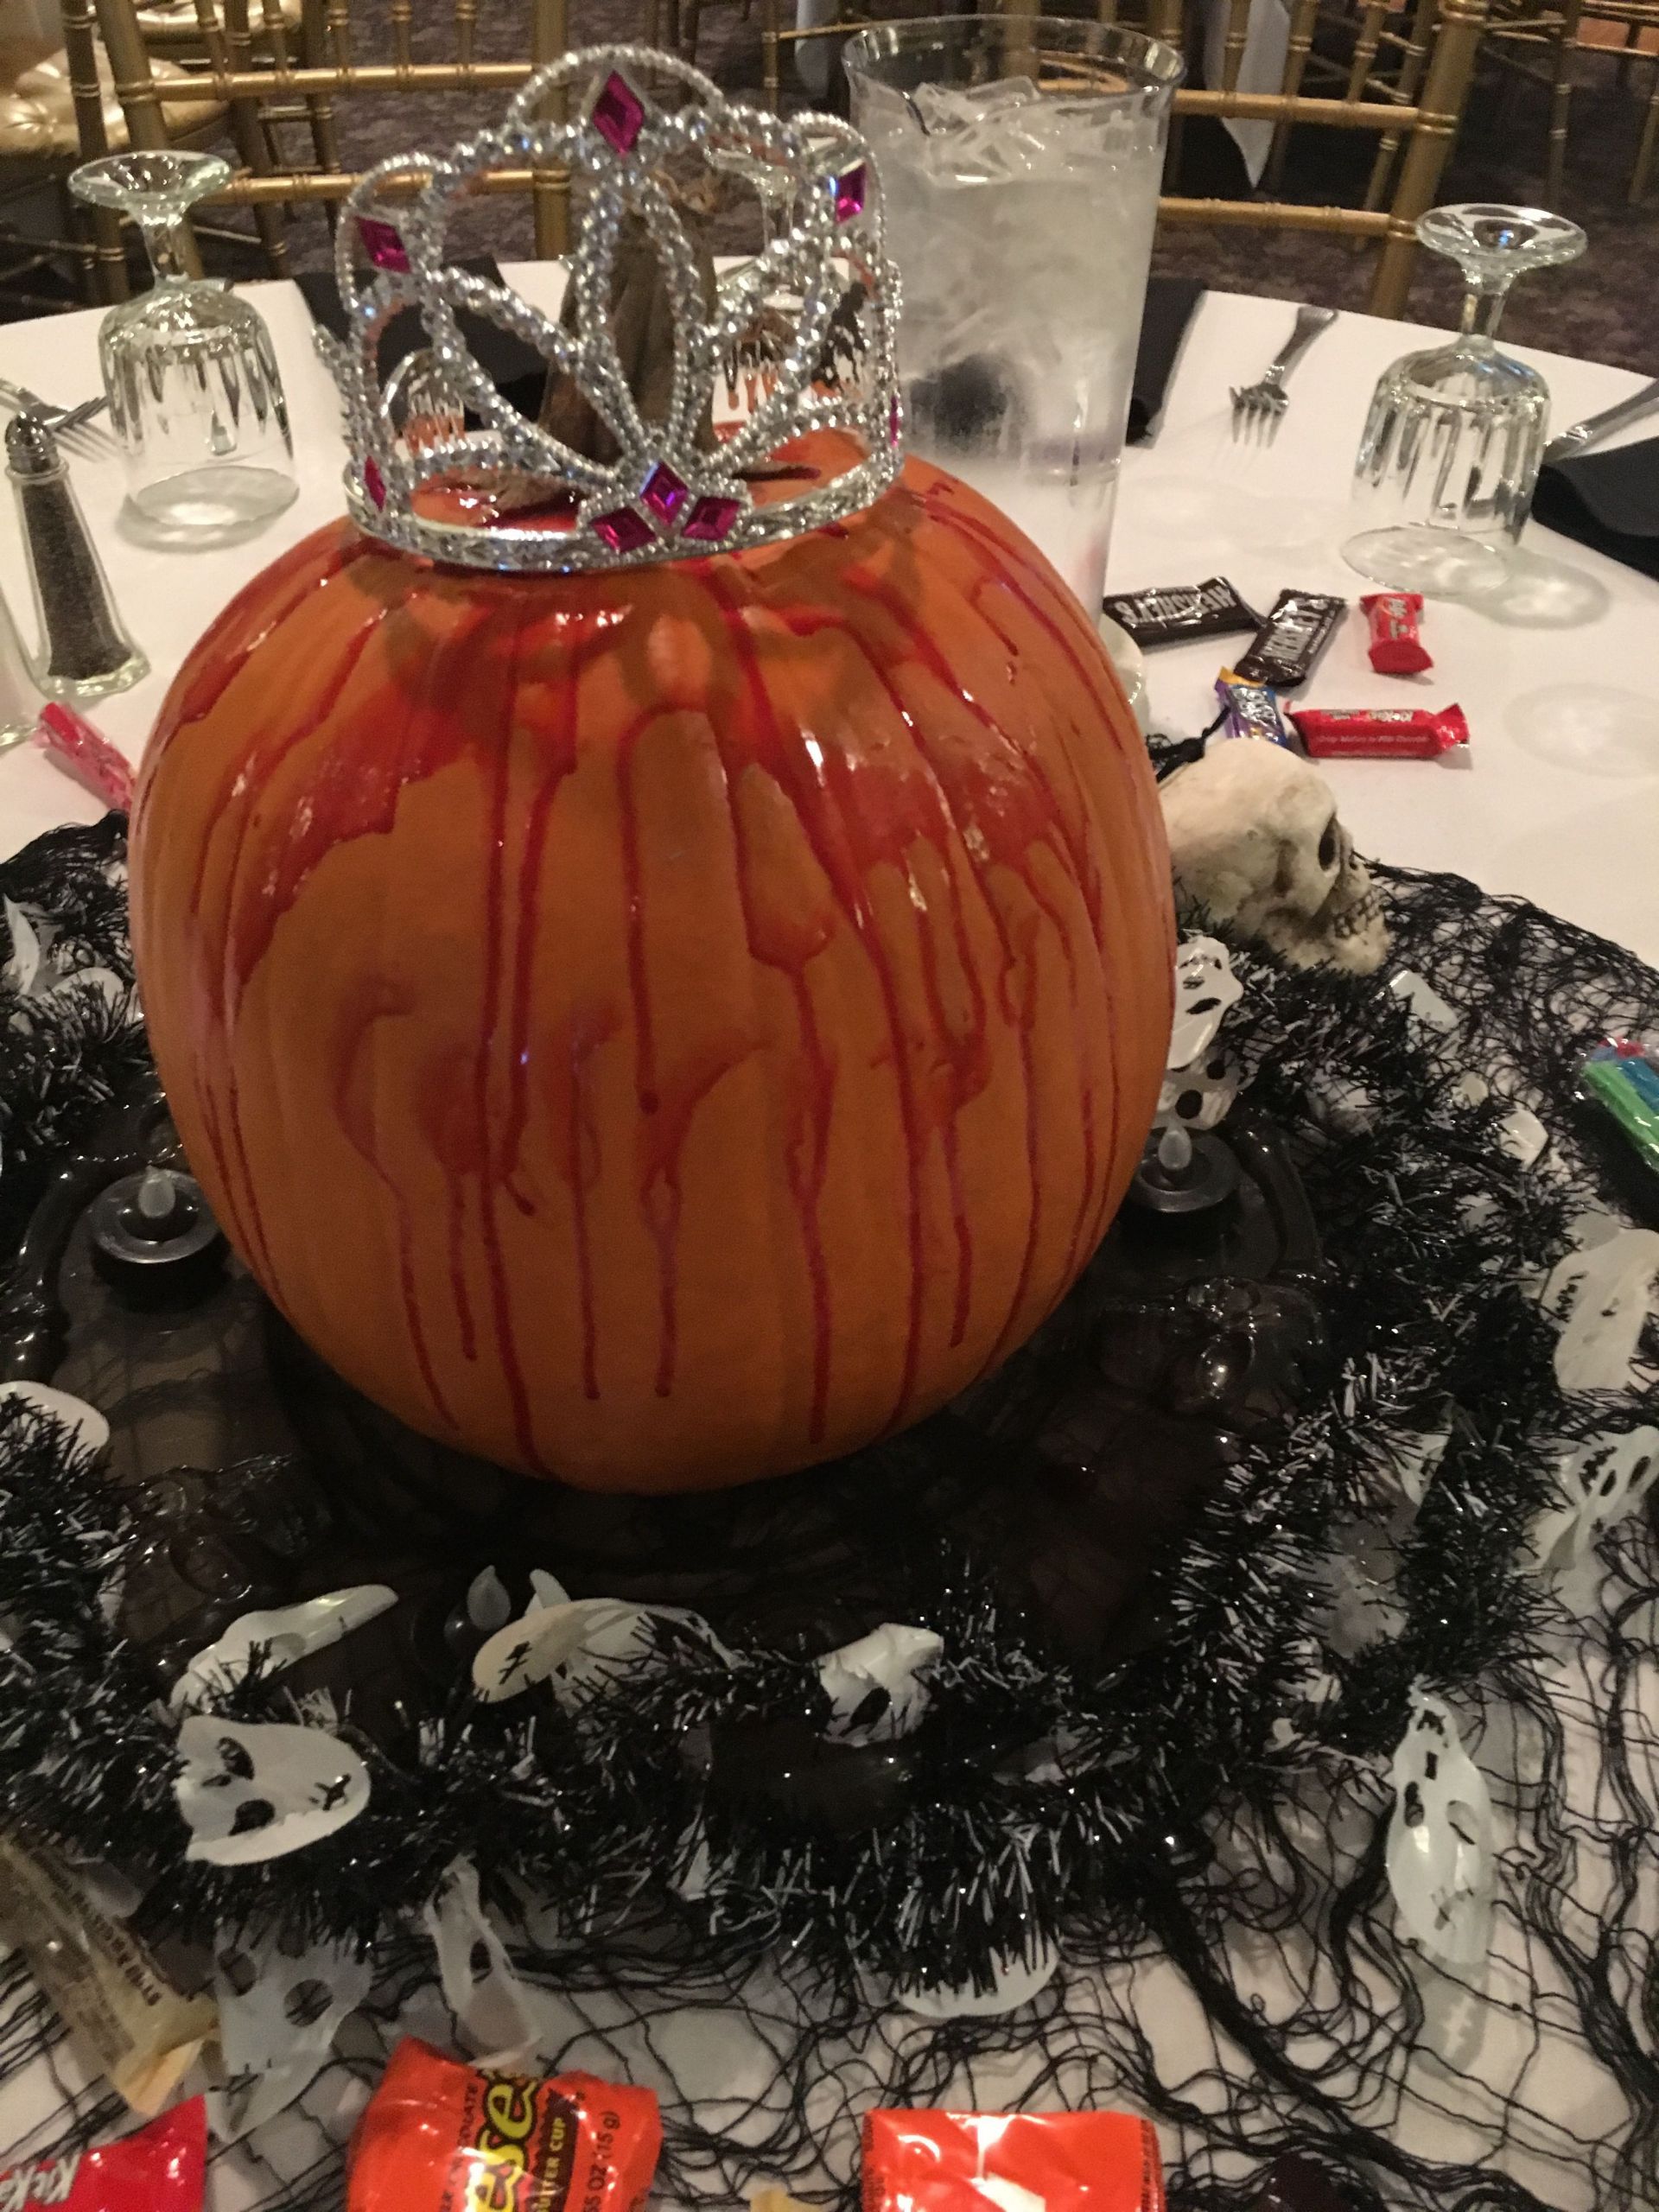 Sweet 16 Halloween Party Ideas
 Halloween party Sweet 16 centerpieces horror movie themed